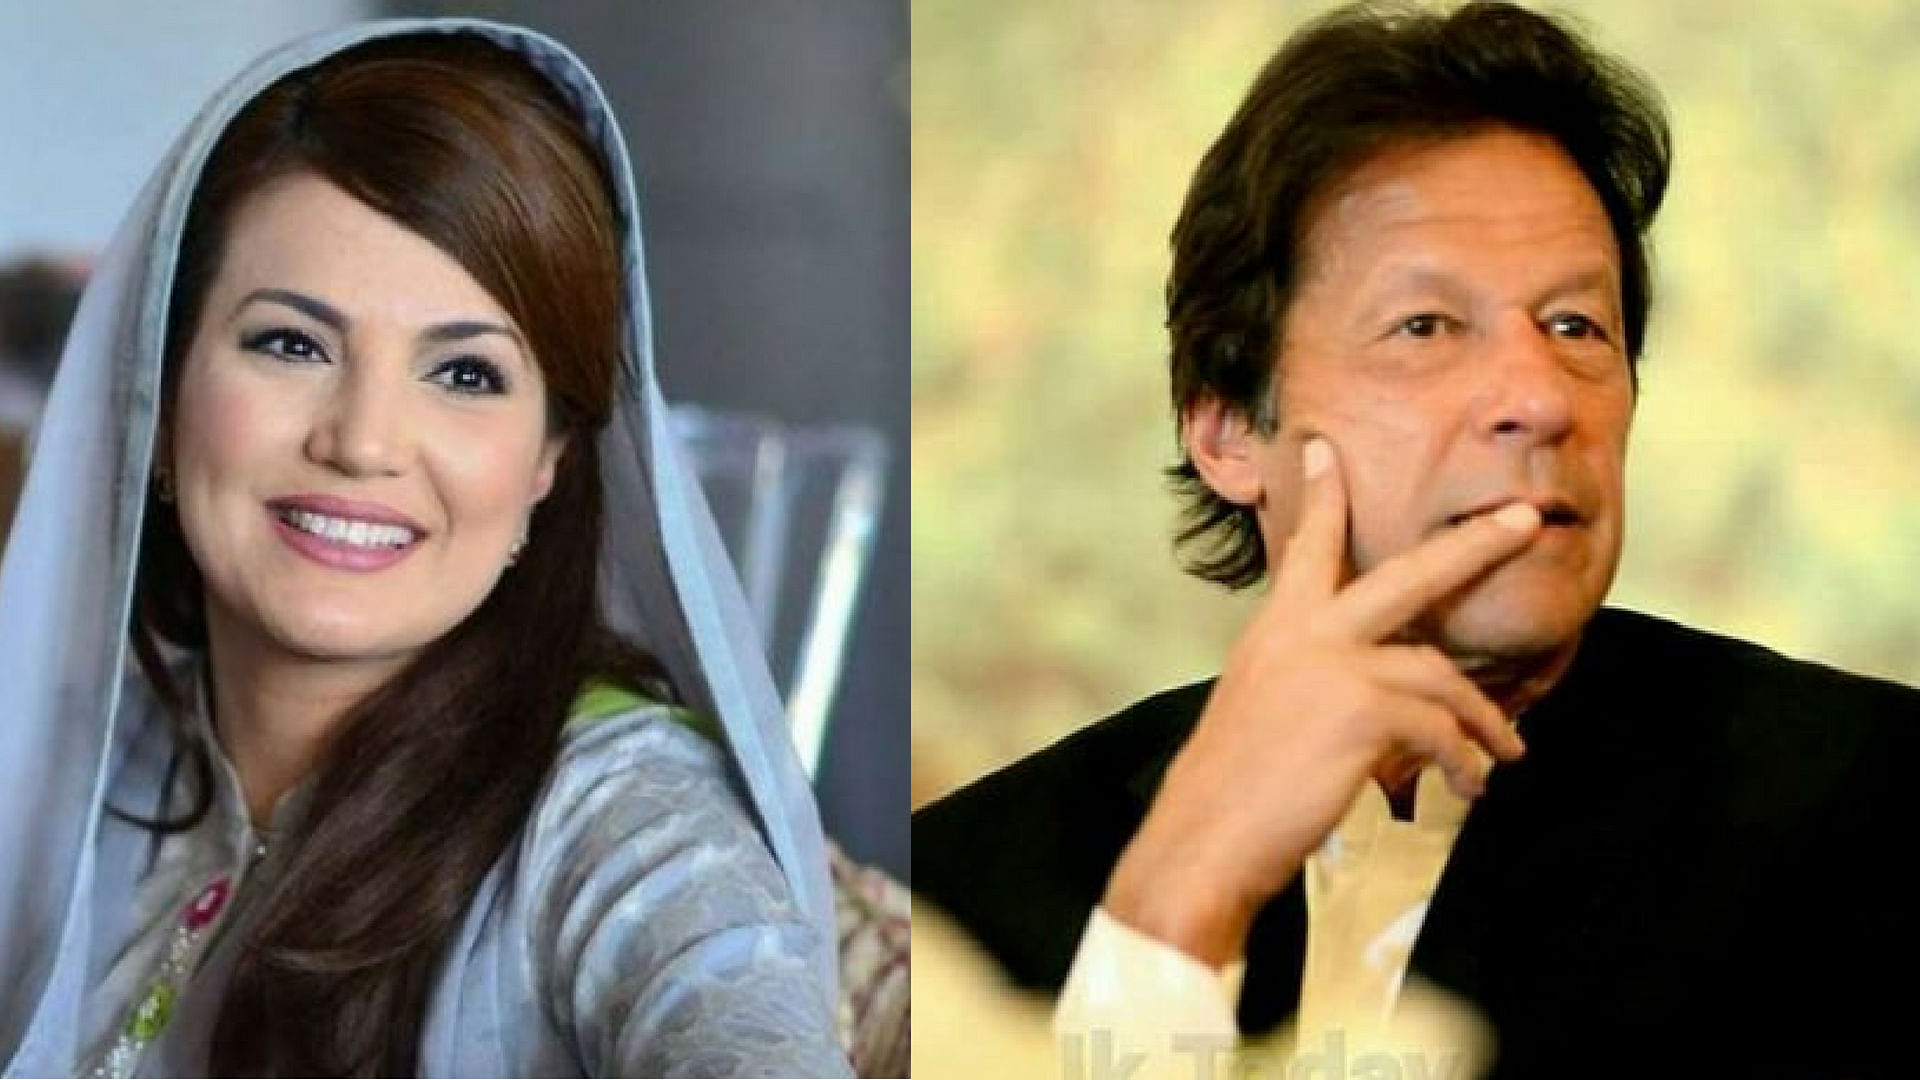 Reham Khan (left) was married to cricketer and politician Imran Khan (right) from January 2015 to October 2015.&nbsp;